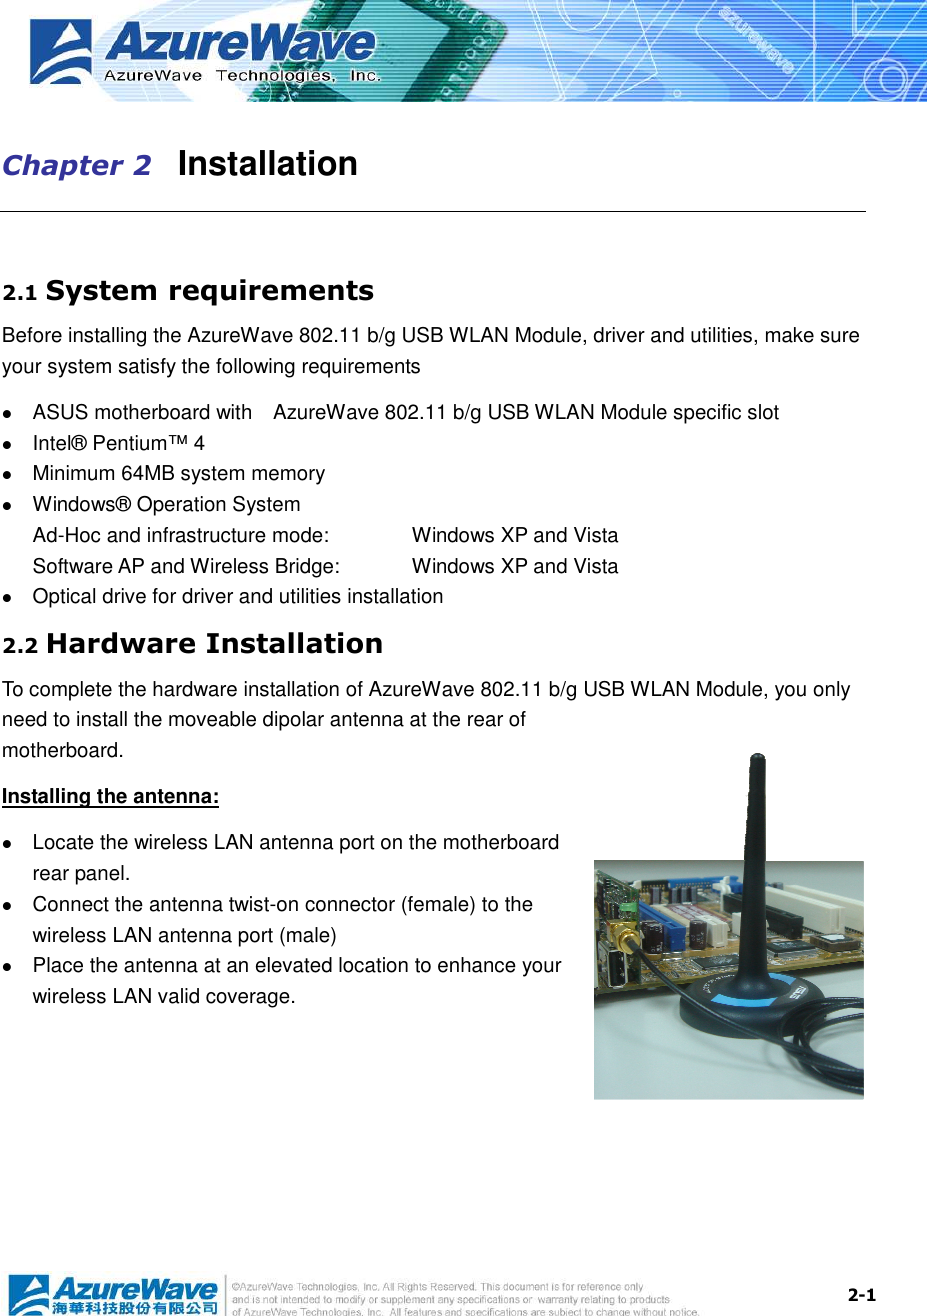  2-1 Chapter 2   Installation  2.1 System requirements Before installing the AzureWave 802.11 b/g USB WLAN Module, driver and utilities, make sure your system satisfy the following requirements  ASUS motherboard with    AzureWave 802.11 b/g USB WLAN Module specific slot  Intel® Pentium™ 4  Minimum 64MB system memory  Windows® Operation System Ad-Hoc and infrastructure mode:      Windows XP and Vista Software AP and Wireless Bridge:    Windows XP and Vista  Optical drive for driver and utilities installation 2.2 Hardware Installation To complete the hardware installation of AzureWave 802.11 b/g USB WLAN Module, you only need to install the moveable dipolar antenna at the rear of motherboard. Installing the antenna:  Locate the wireless LAN antenna port on the motherboard rear panel.    Connect the antenna twist-on connector (female) to the wireless LAN antenna port (male)  Place the antenna at an elevated location to enhance your wireless LAN valid coverage.    